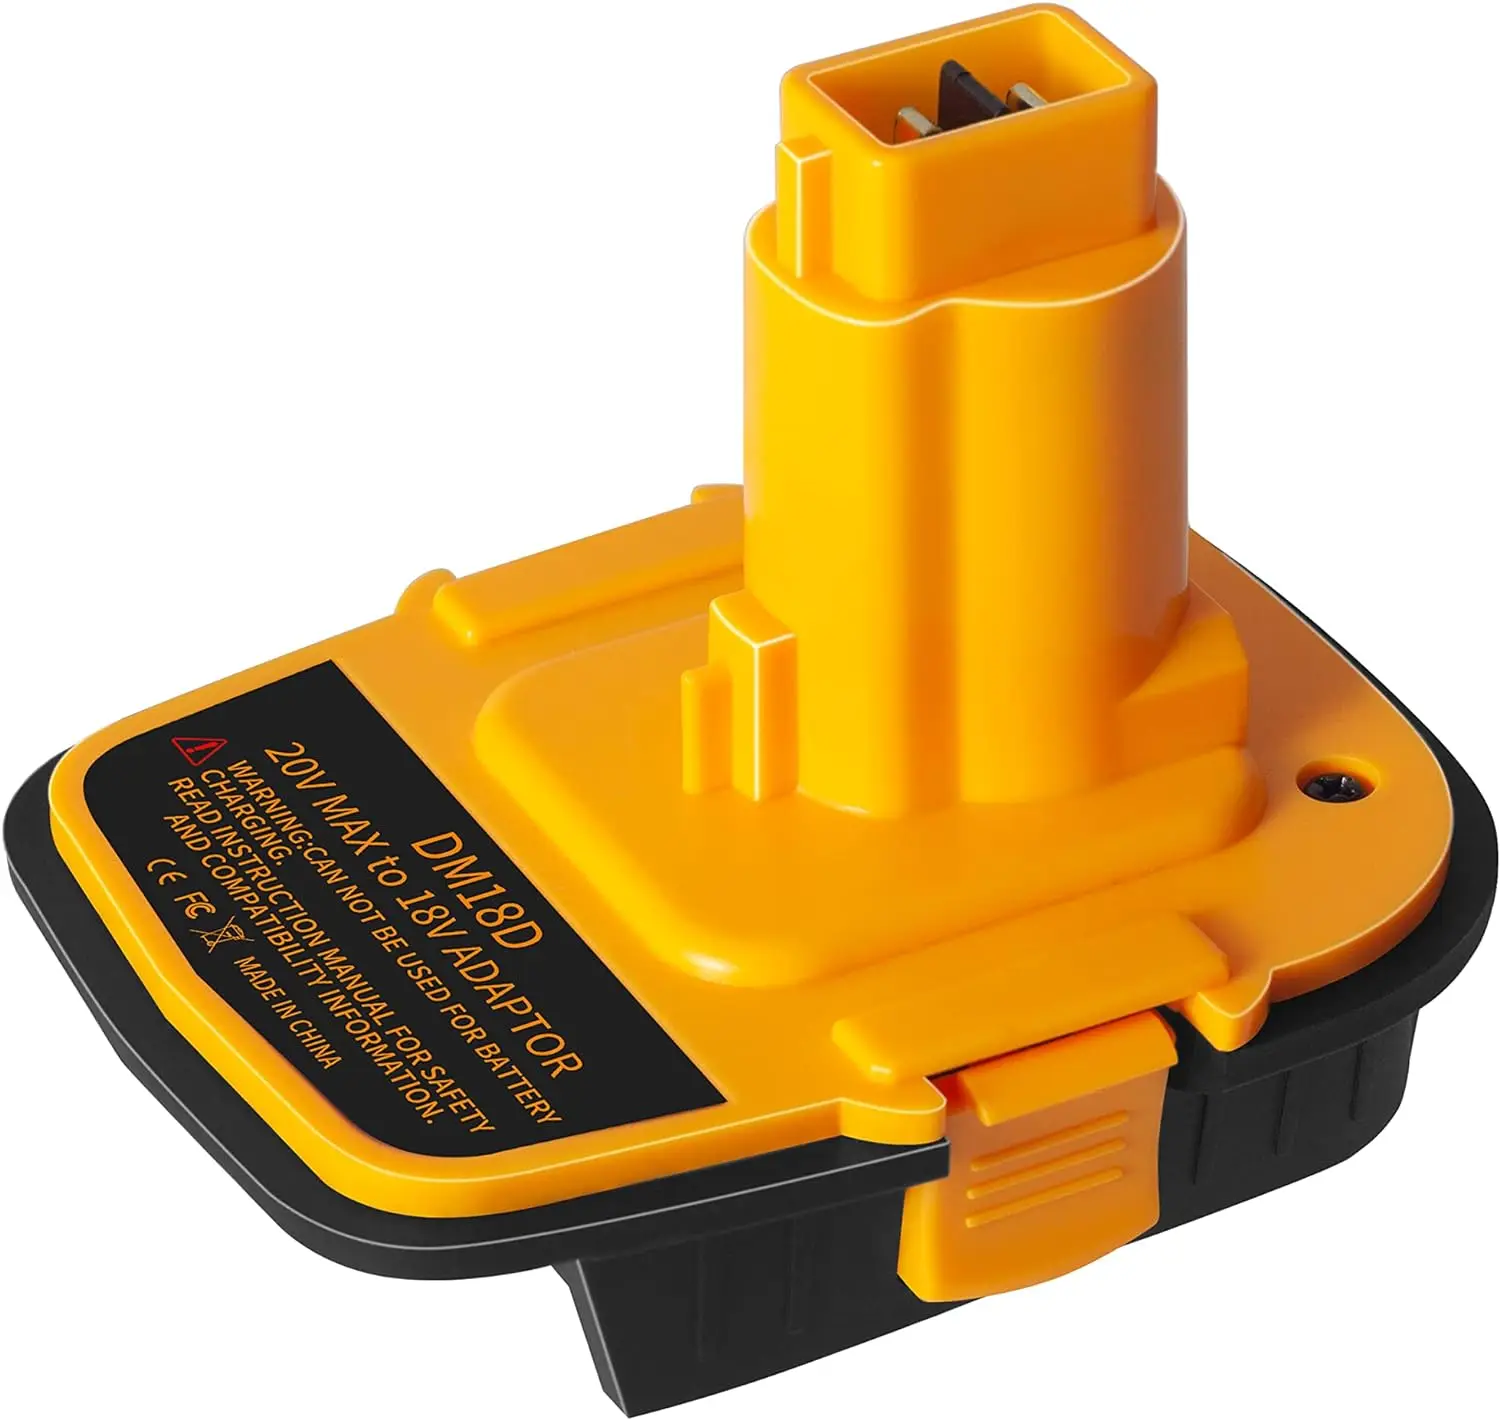 Battery Adapter with USB Convert for DeWalt 20V for Milwaukee 18V Lithium Battery to For DeWalt NiCad & NiMh Battery Power Tools 4 8v nimh battery repalcement for summer infant 29270 10 29580 10 29710 29740 29580 29590 29610 29620 29630 29790 29940 etc